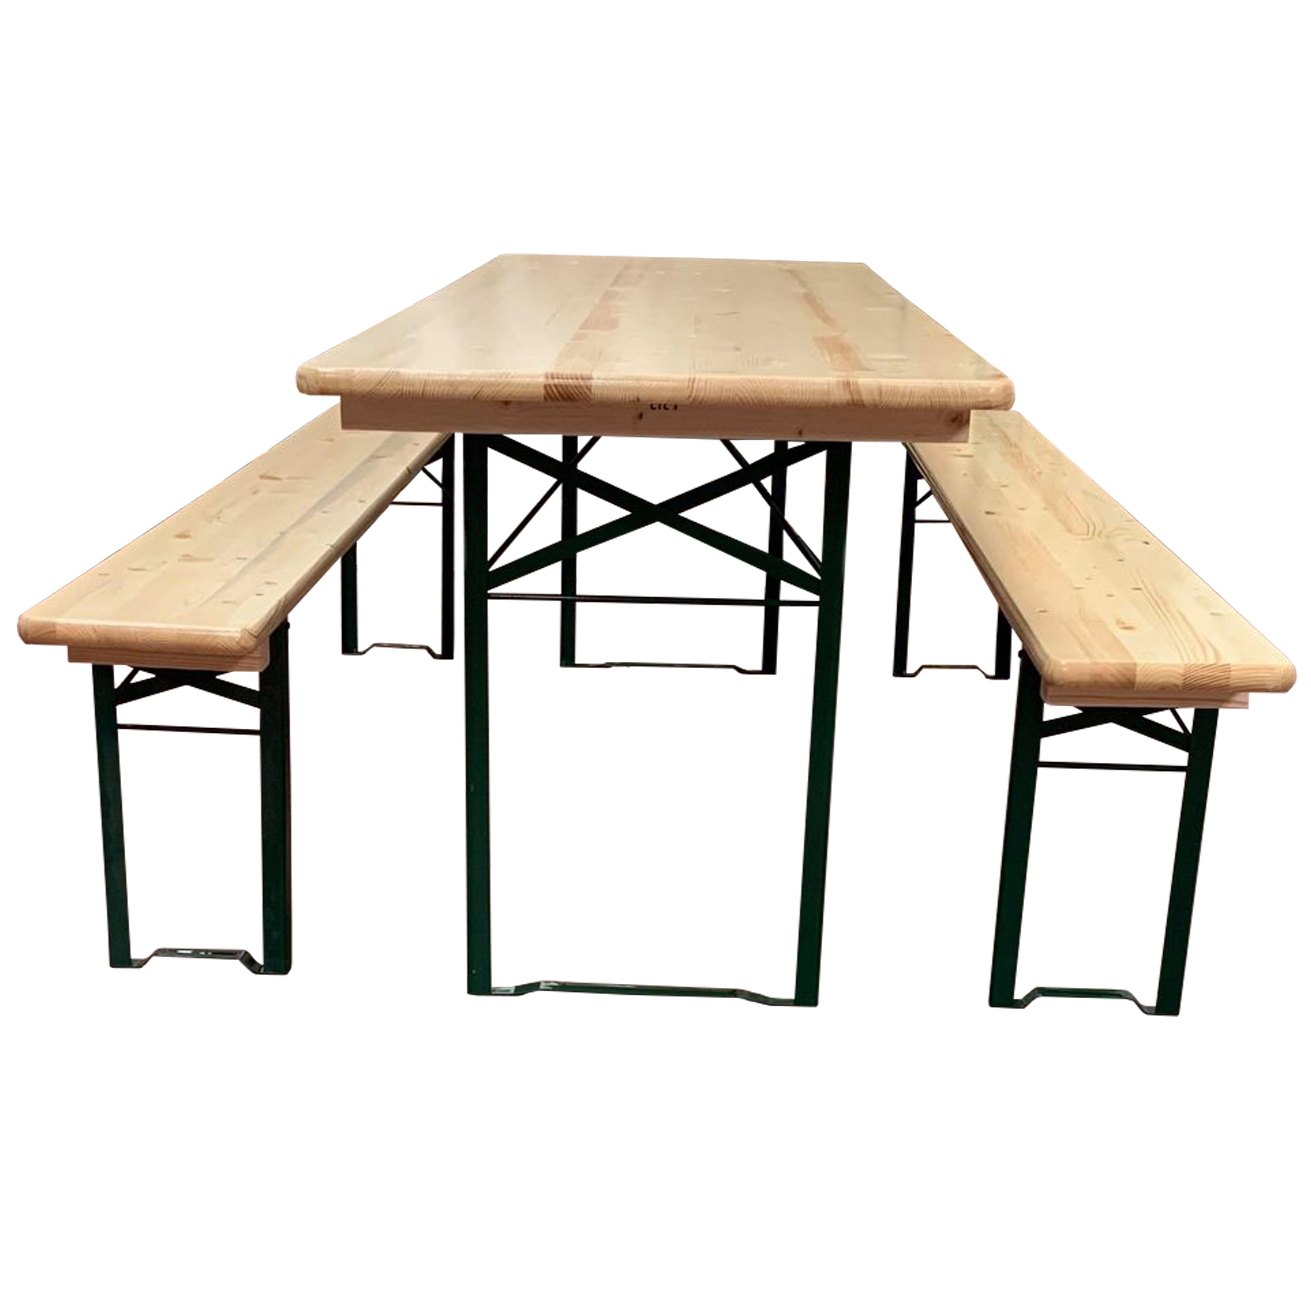 7,2ft Beer set table 220x70cm (benches sold separately) / steel corner legs